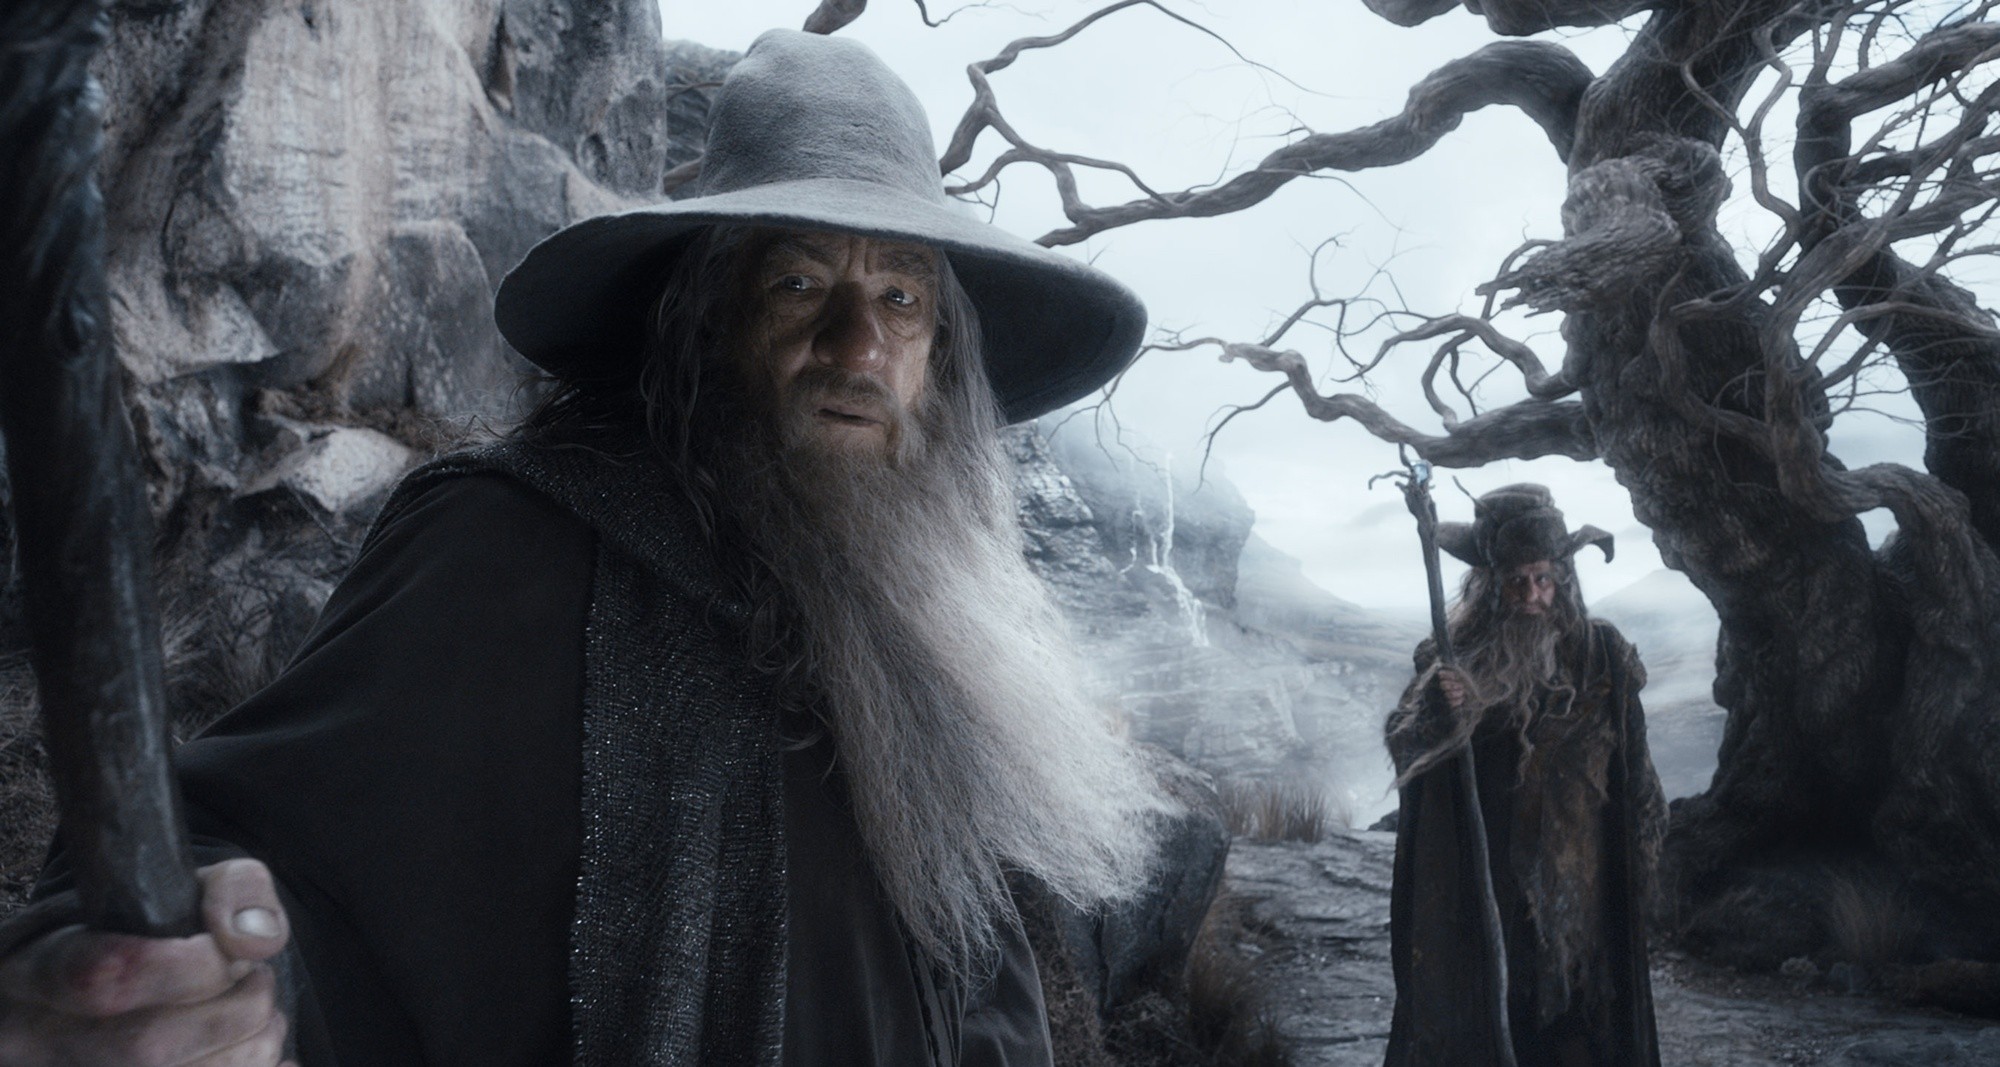 Ian McKellen stars as Gandalf and Sylvester McCoy stars as Radagast in Warner Bros. Pictures' The Hobbit: The Desolation of Smaug (2013)